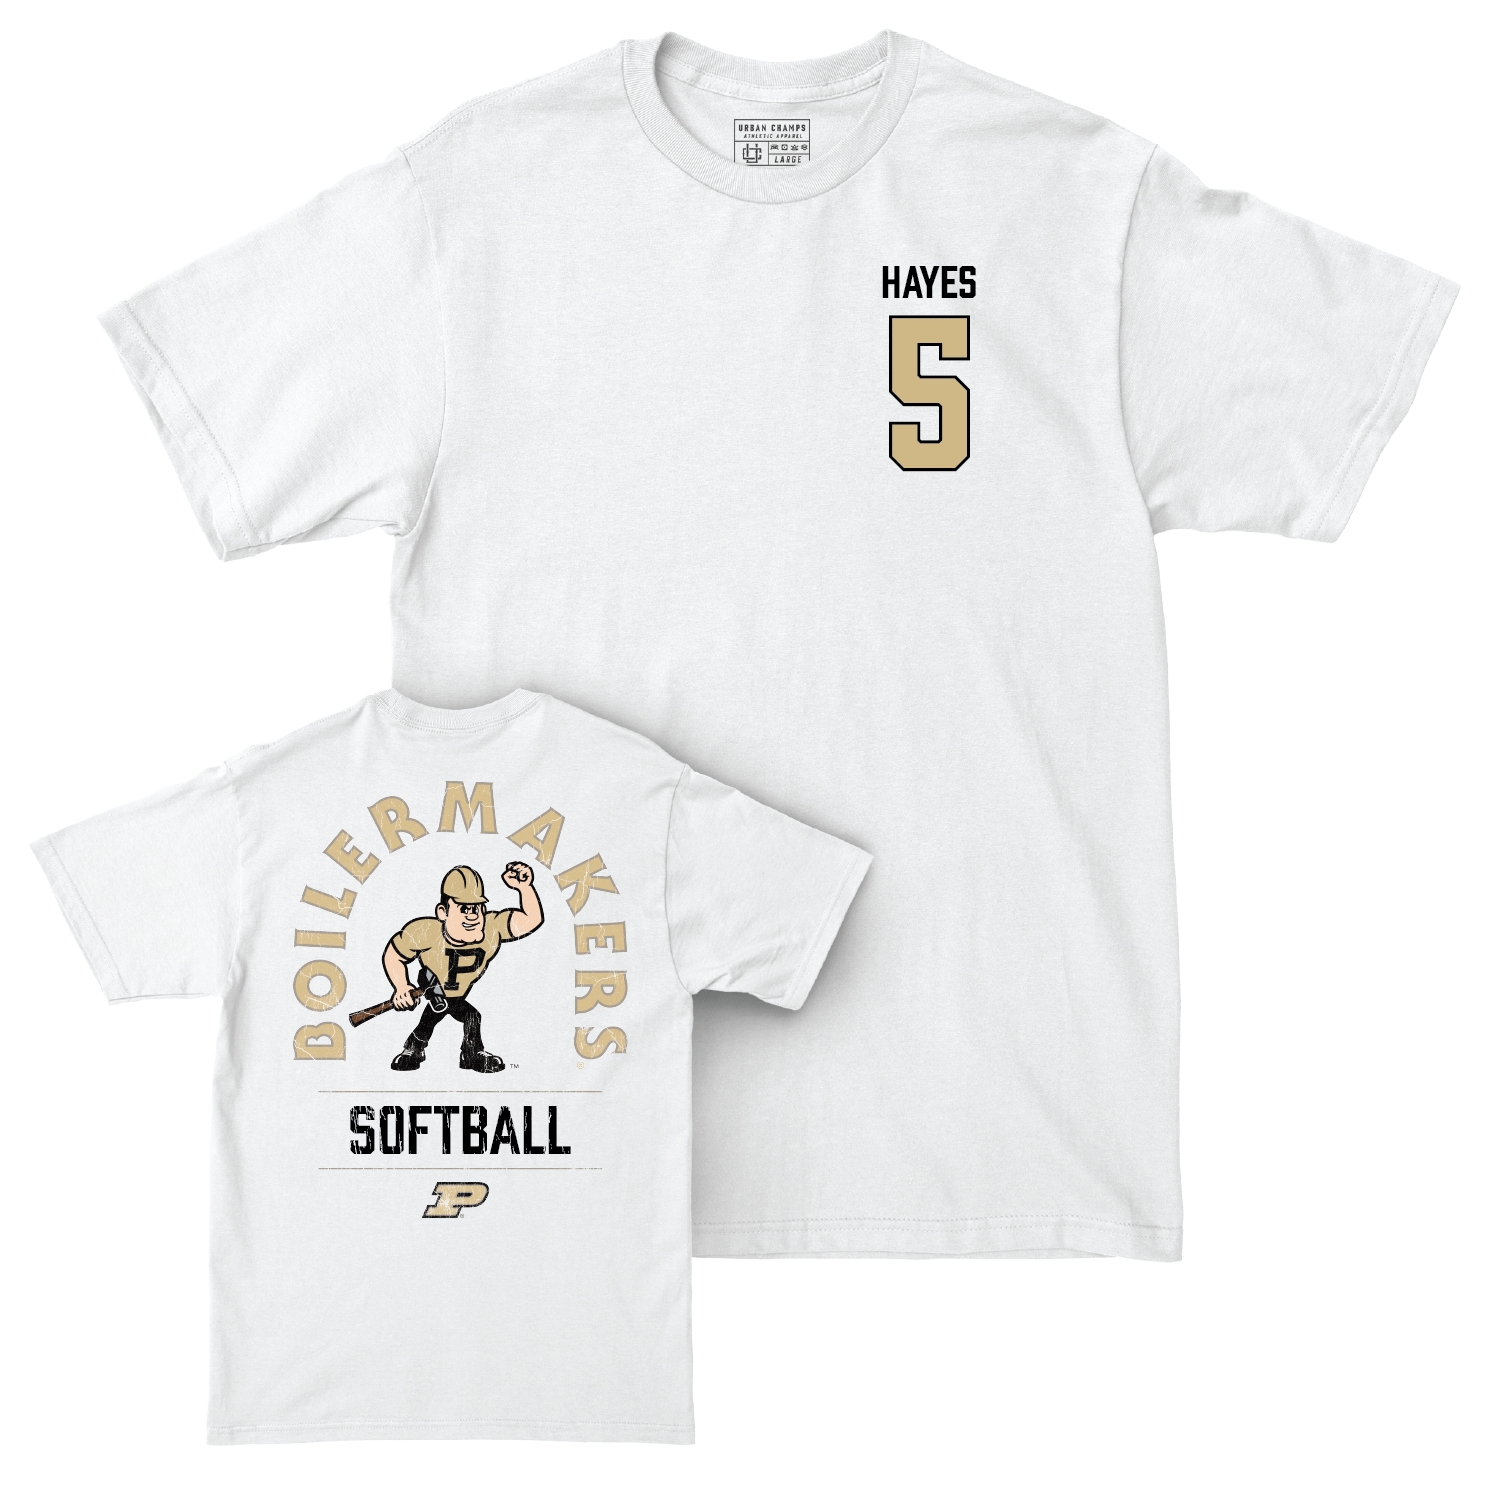 Softball White Mascot Comfort Colors Tee - Hailey Hayes | #5 Youth Small